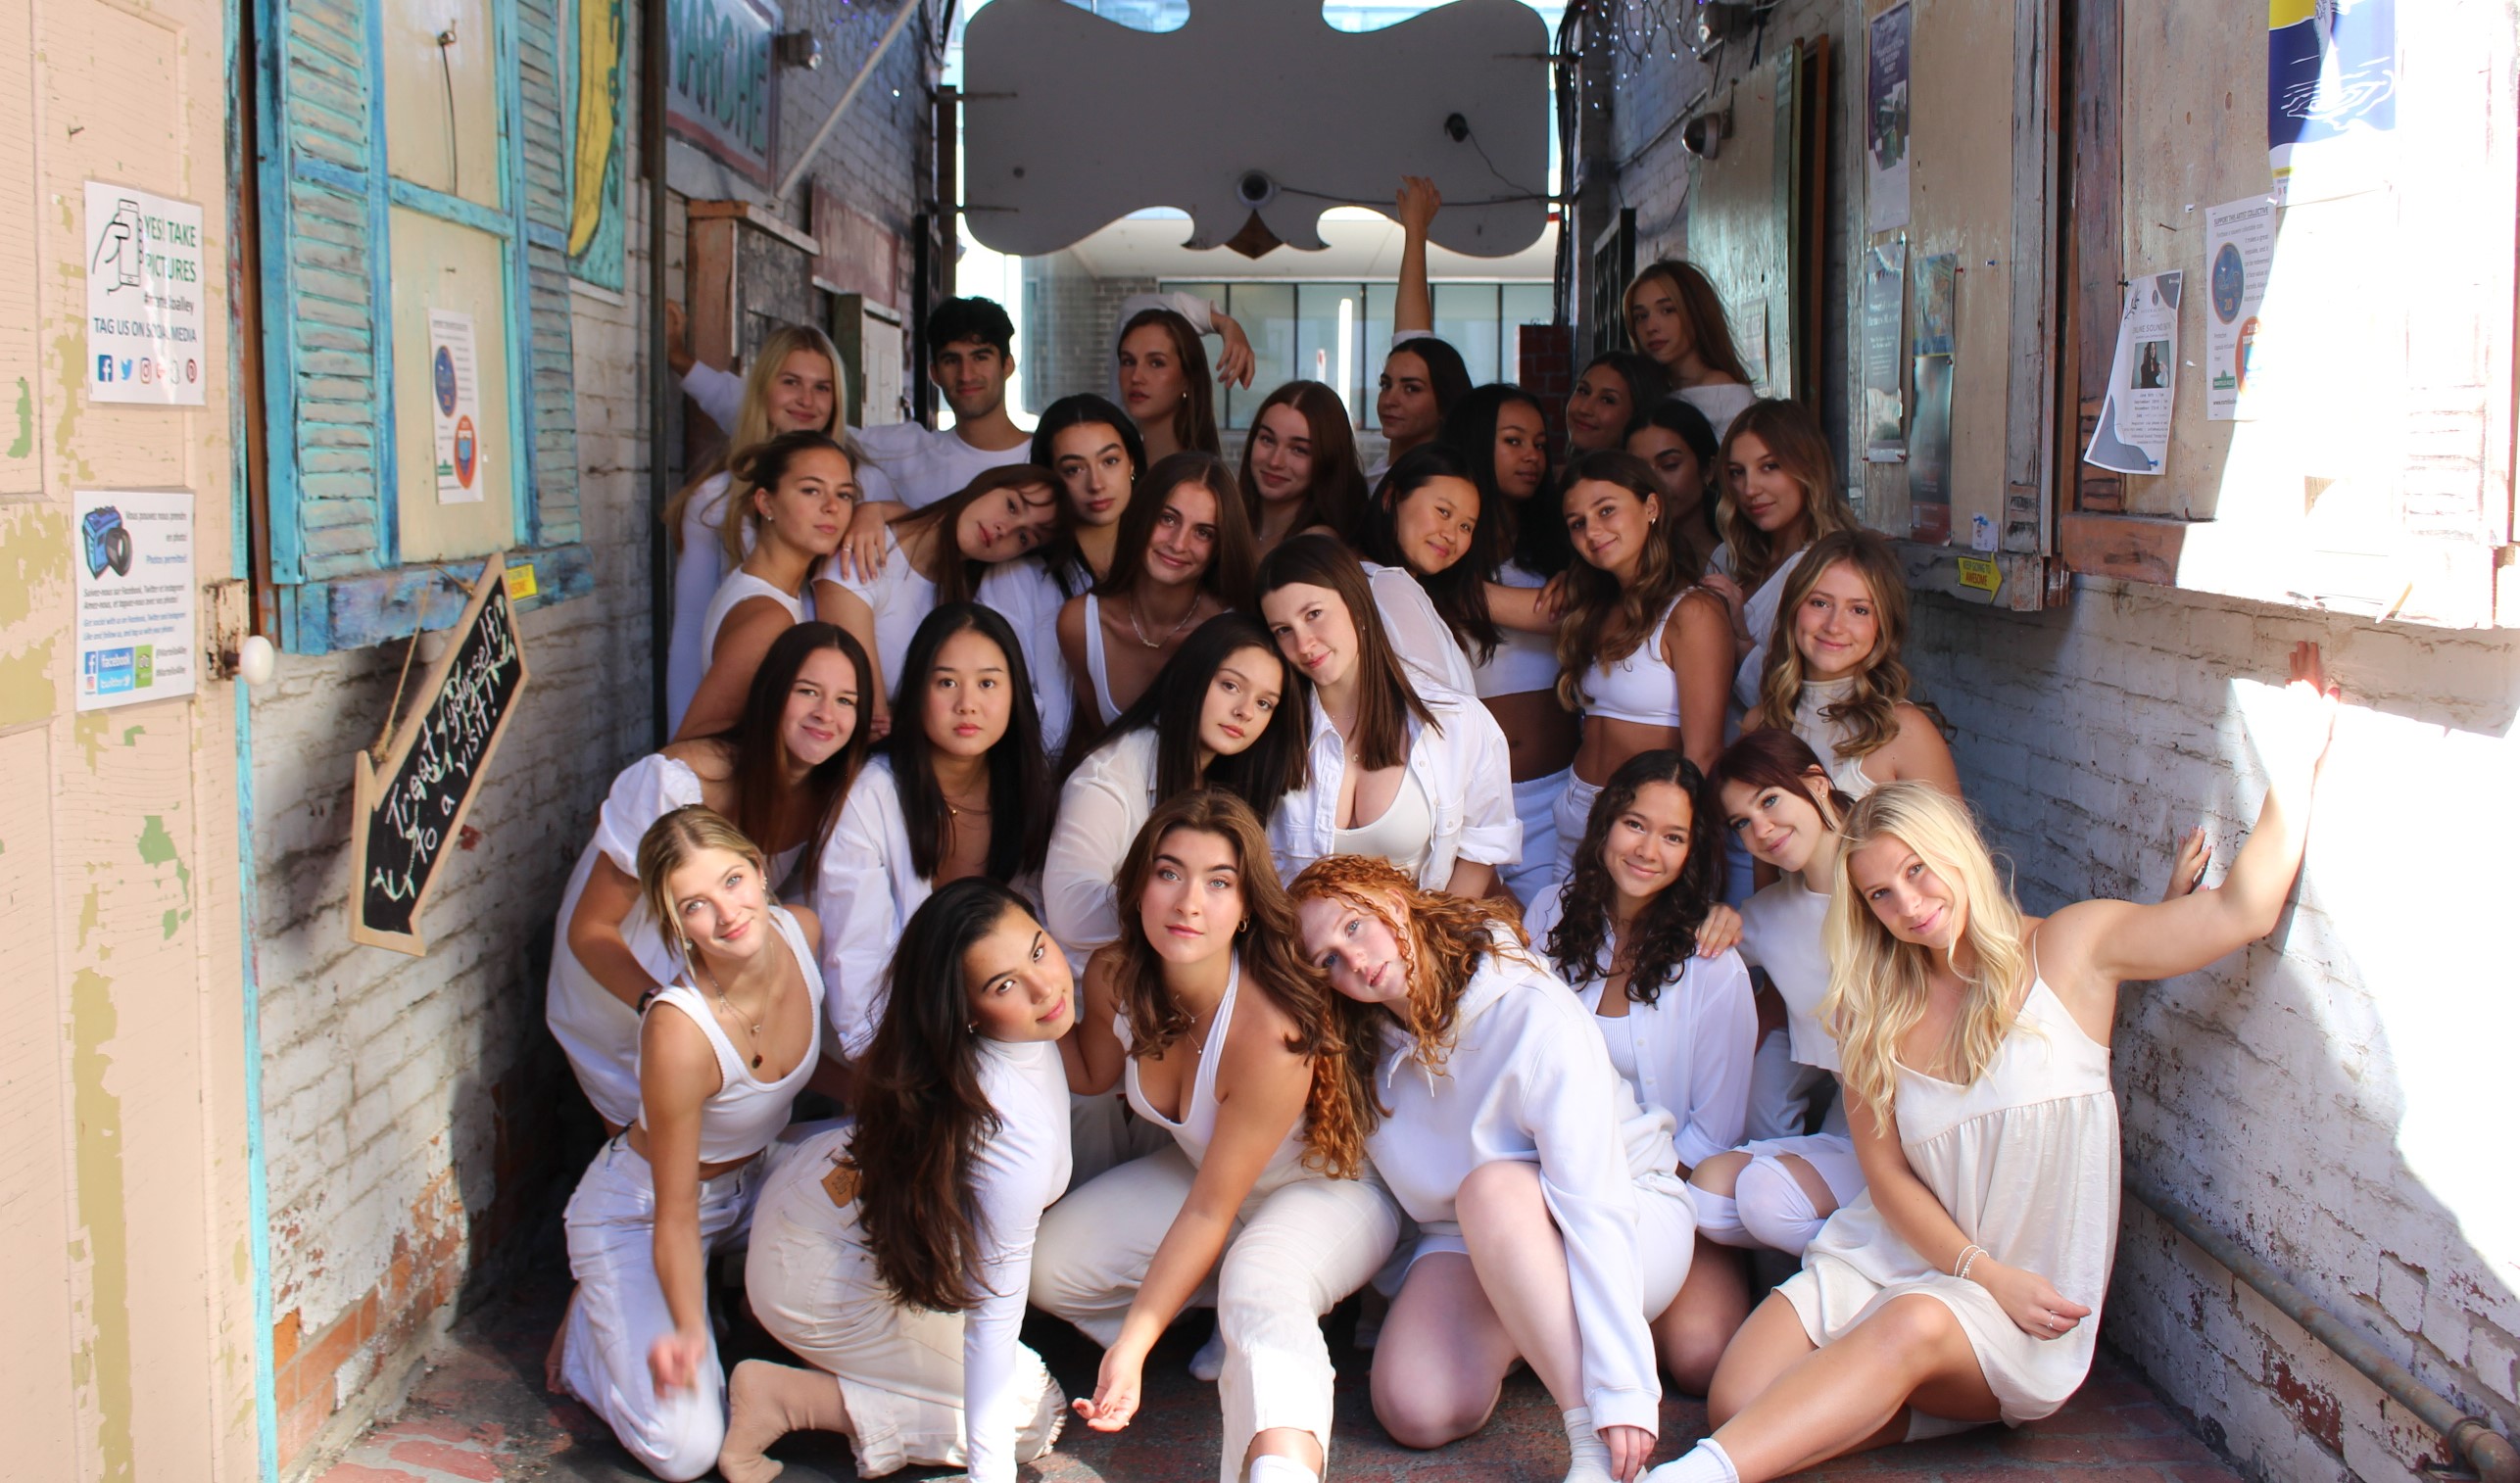 Donate to Queen's Competitive Dance Team